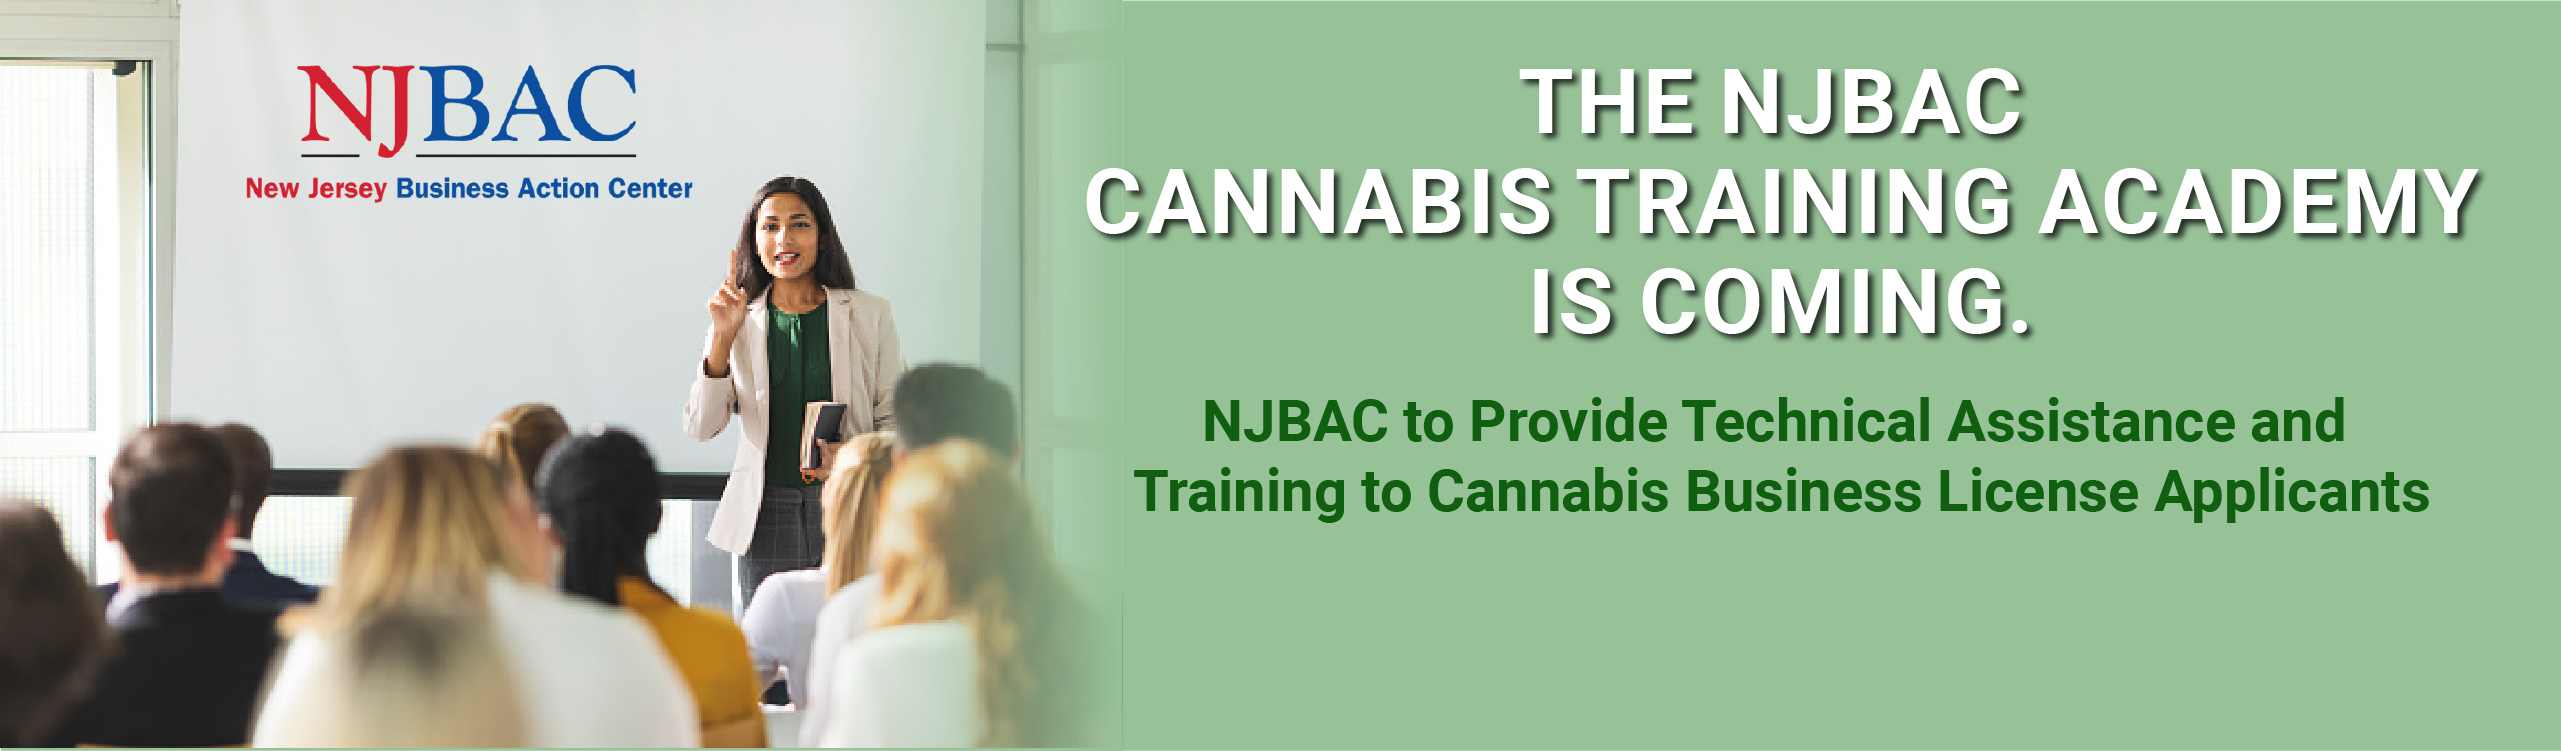 The NJBAC Cannabis Training Academy is coming. NJBAC to provide Technical Assistance and Training to Cannabis Business License Applicants